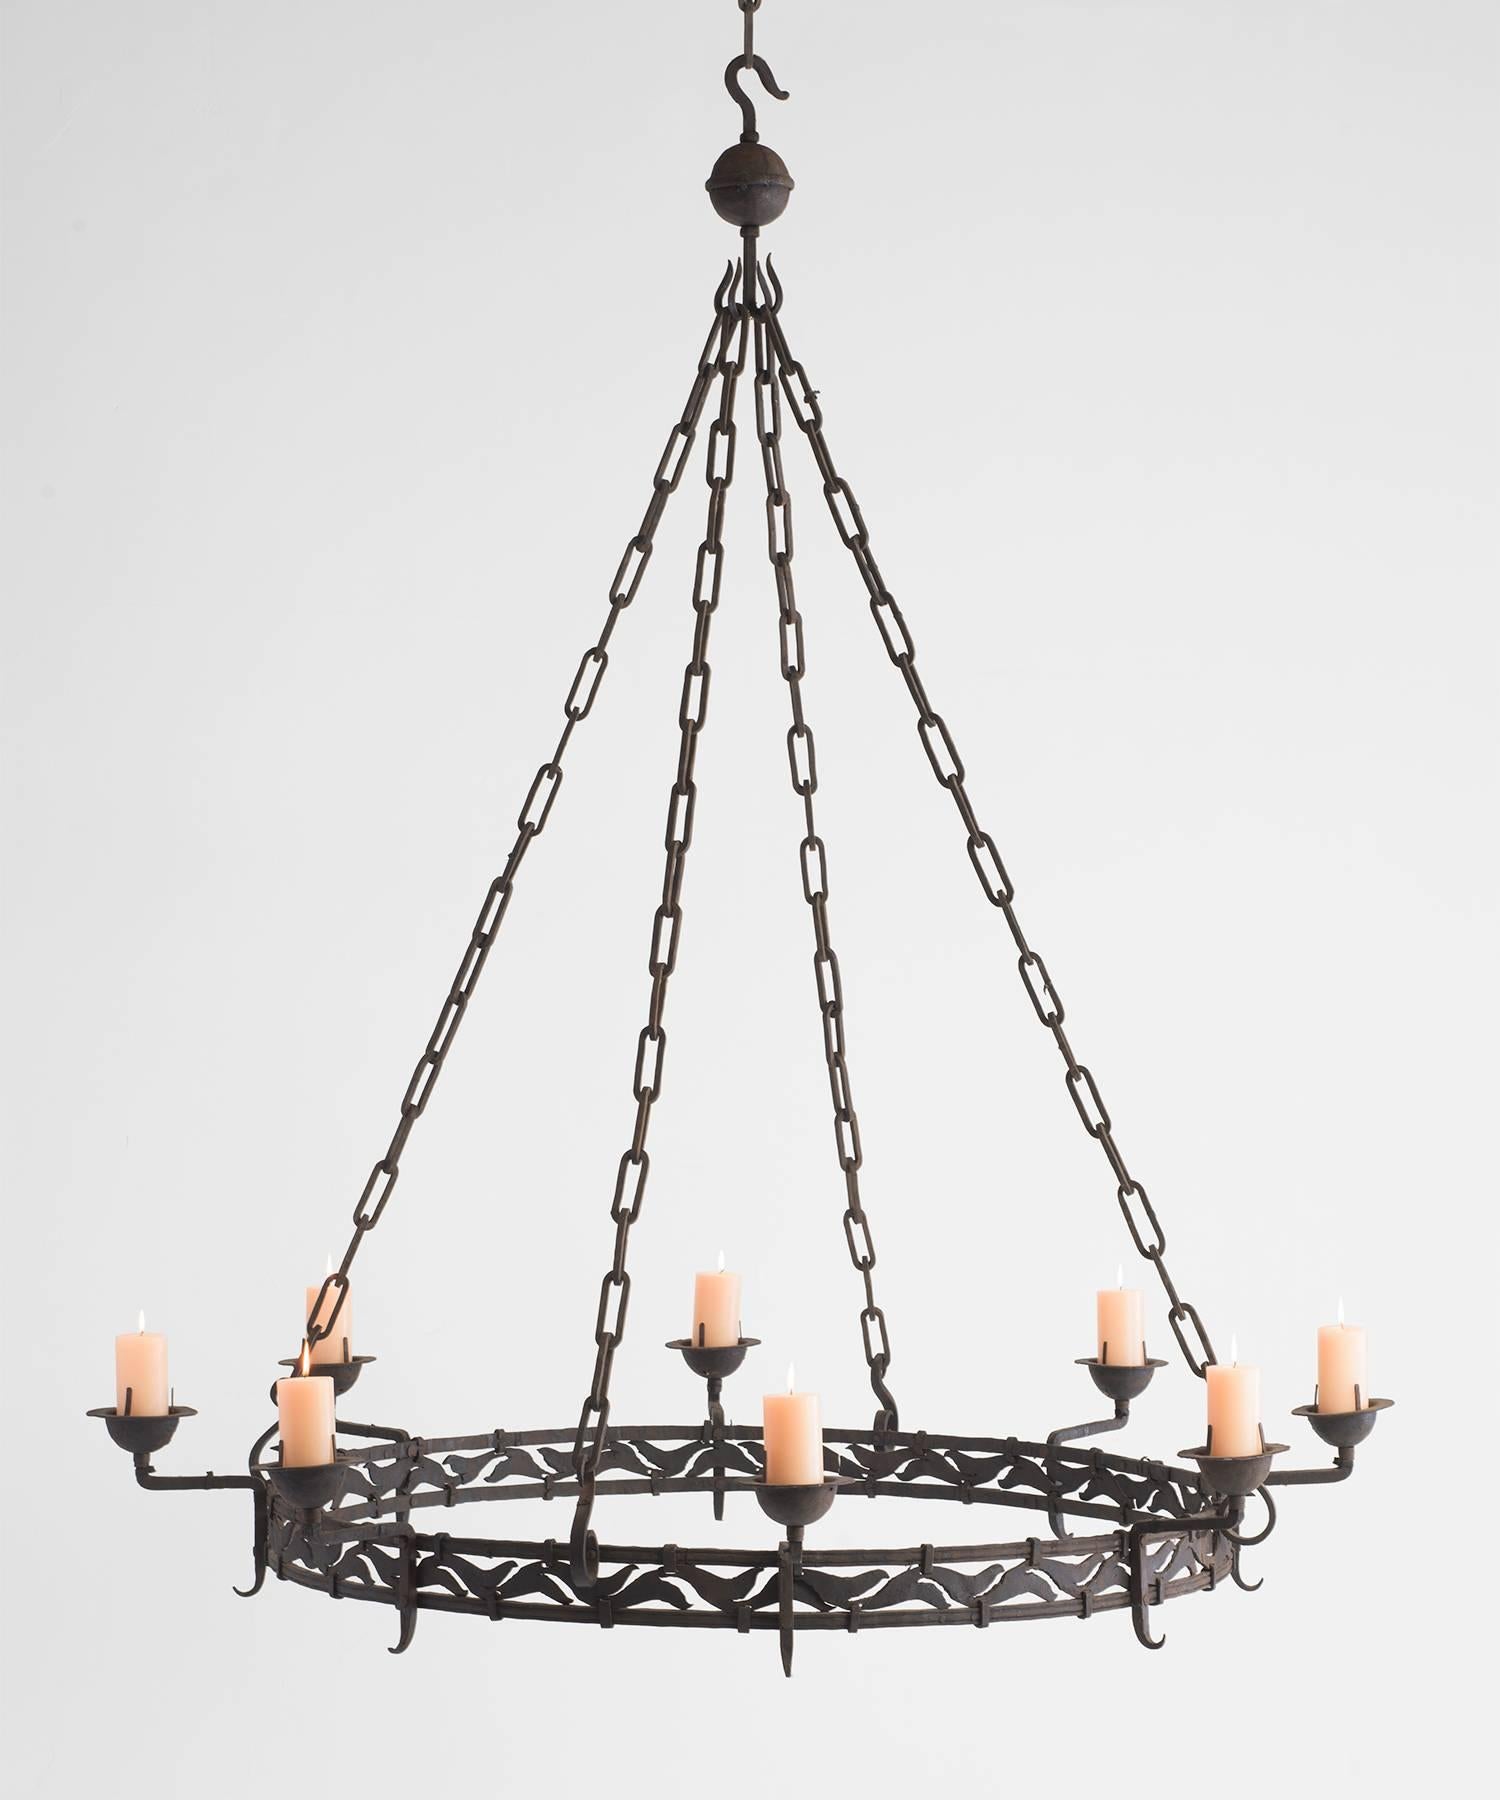 Massive Iron Candlelight Chandelier, circa 1900

Extremely large form holds (8) pillar candles with patterned ironwork around base. 

12.5